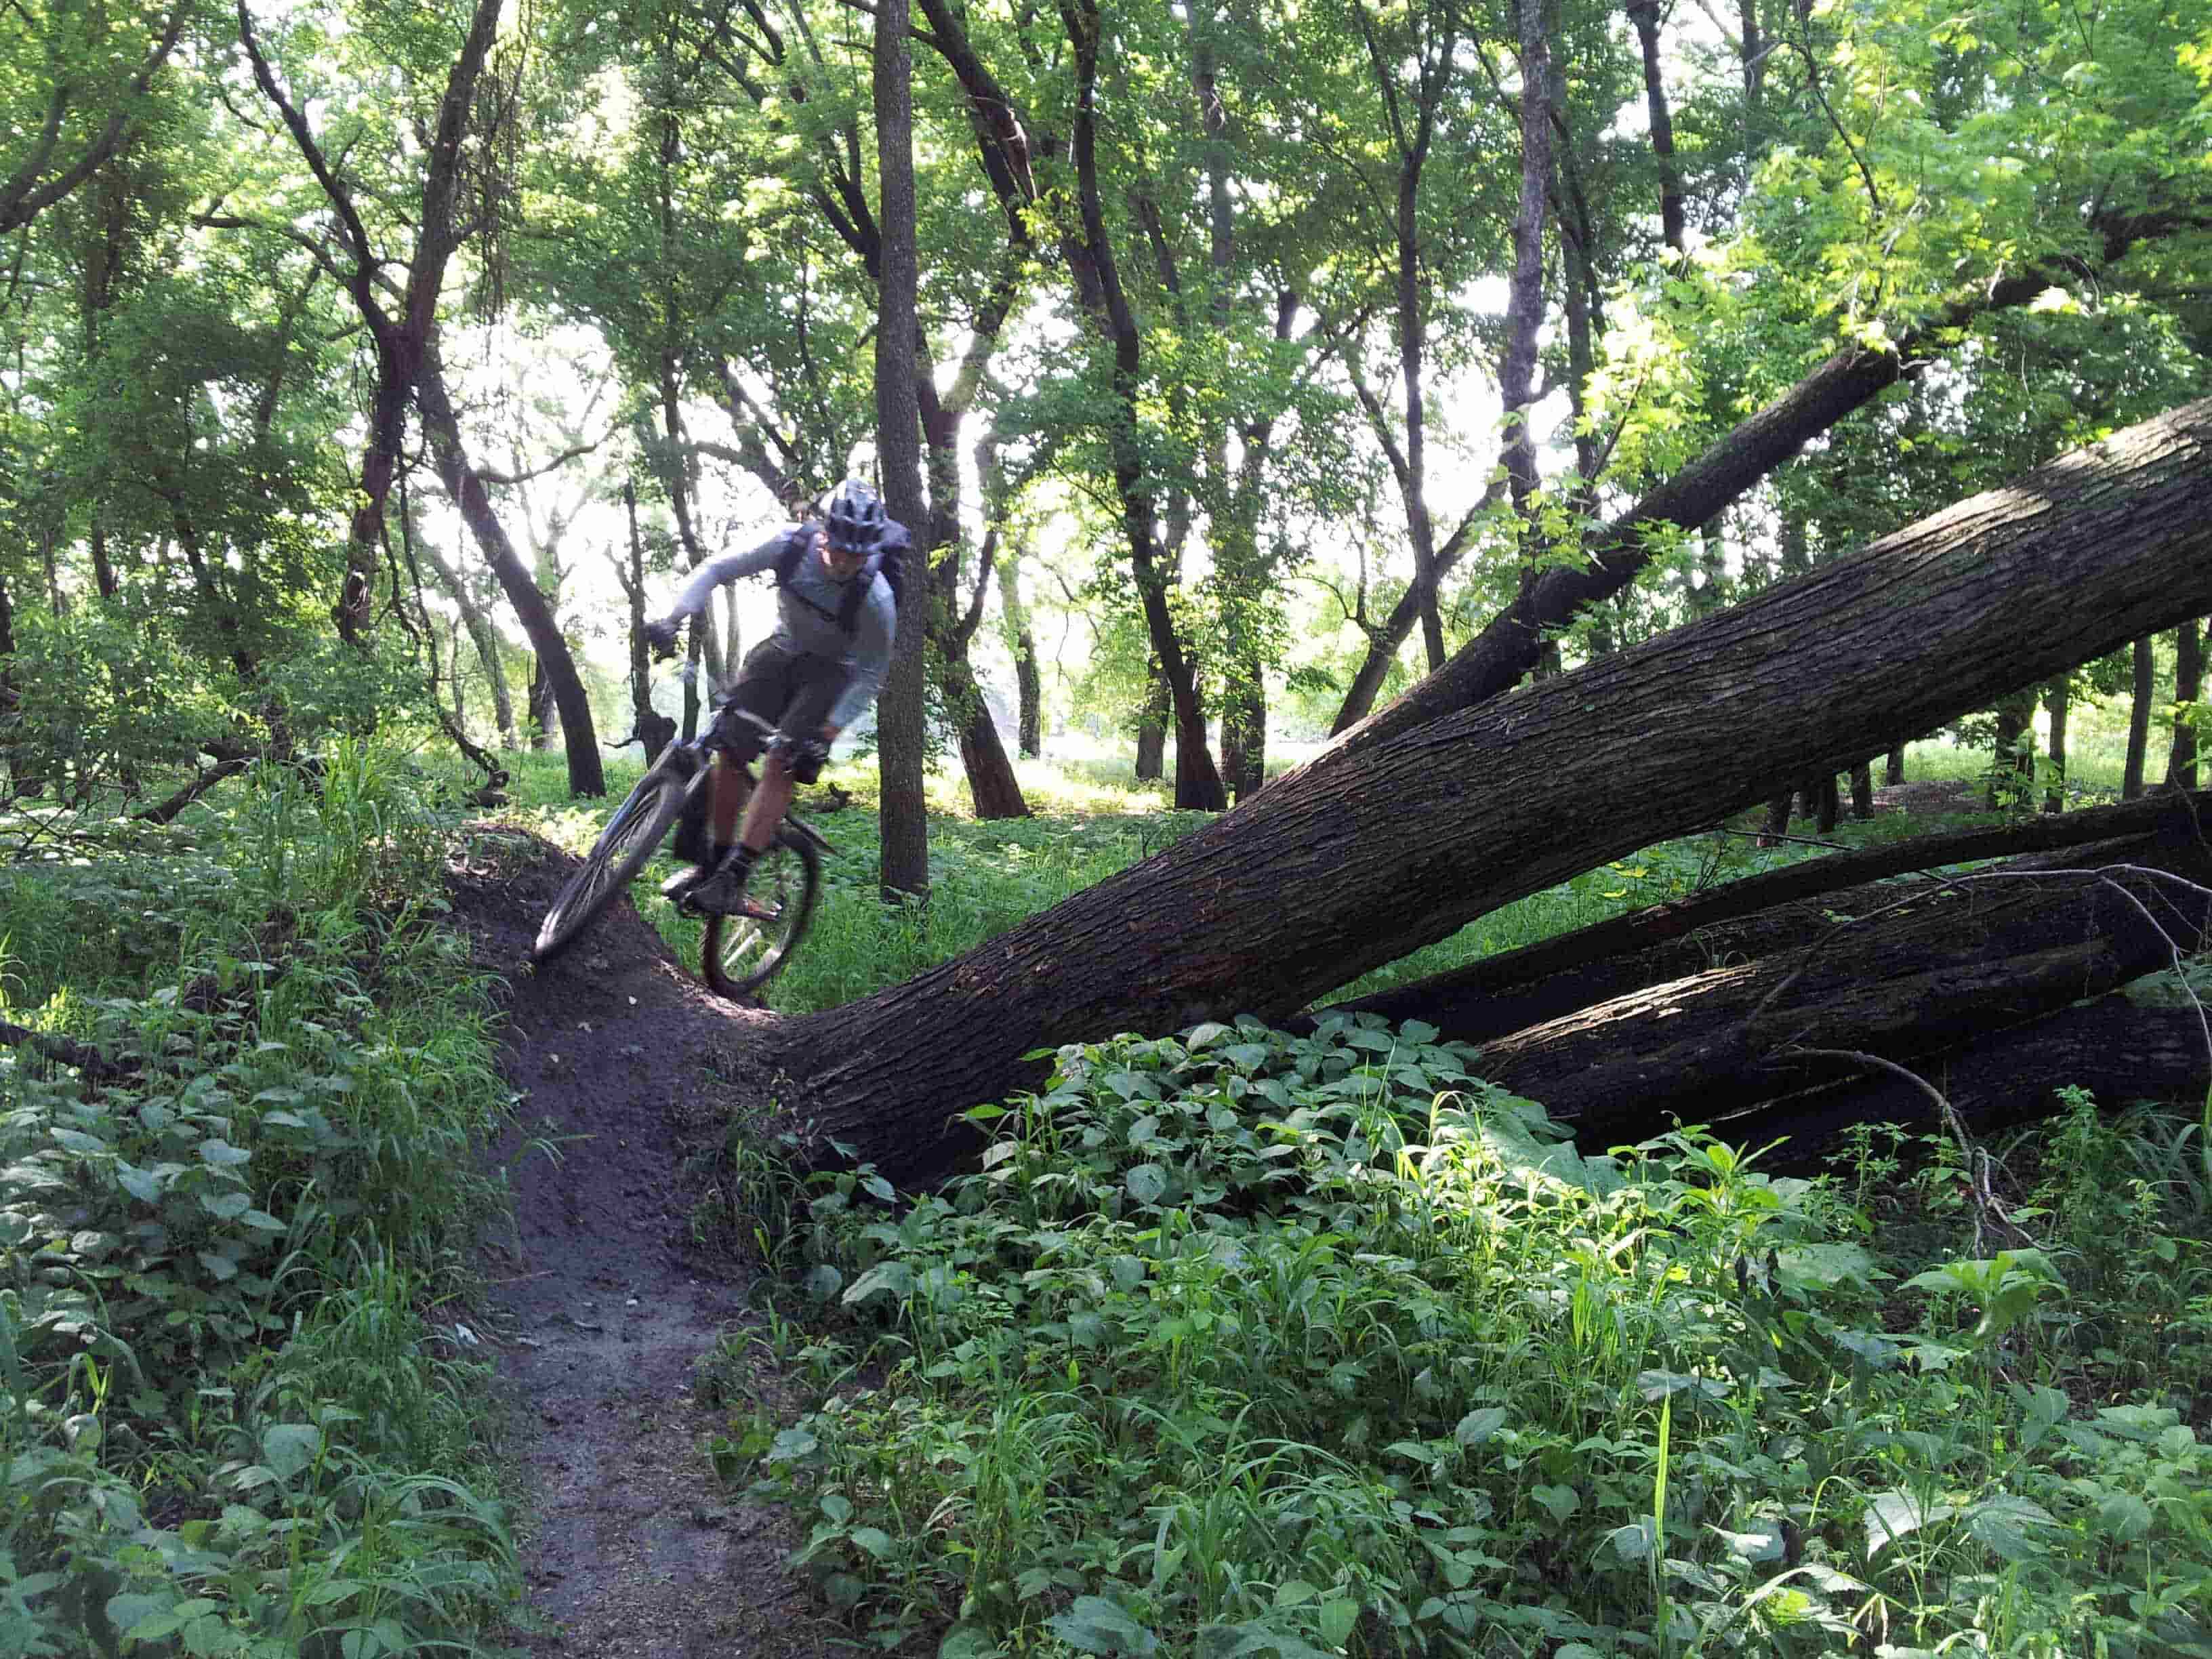 Front view of a cyclist riding their Surly bike over the roots of a down tree, on a dirt trail in the woods